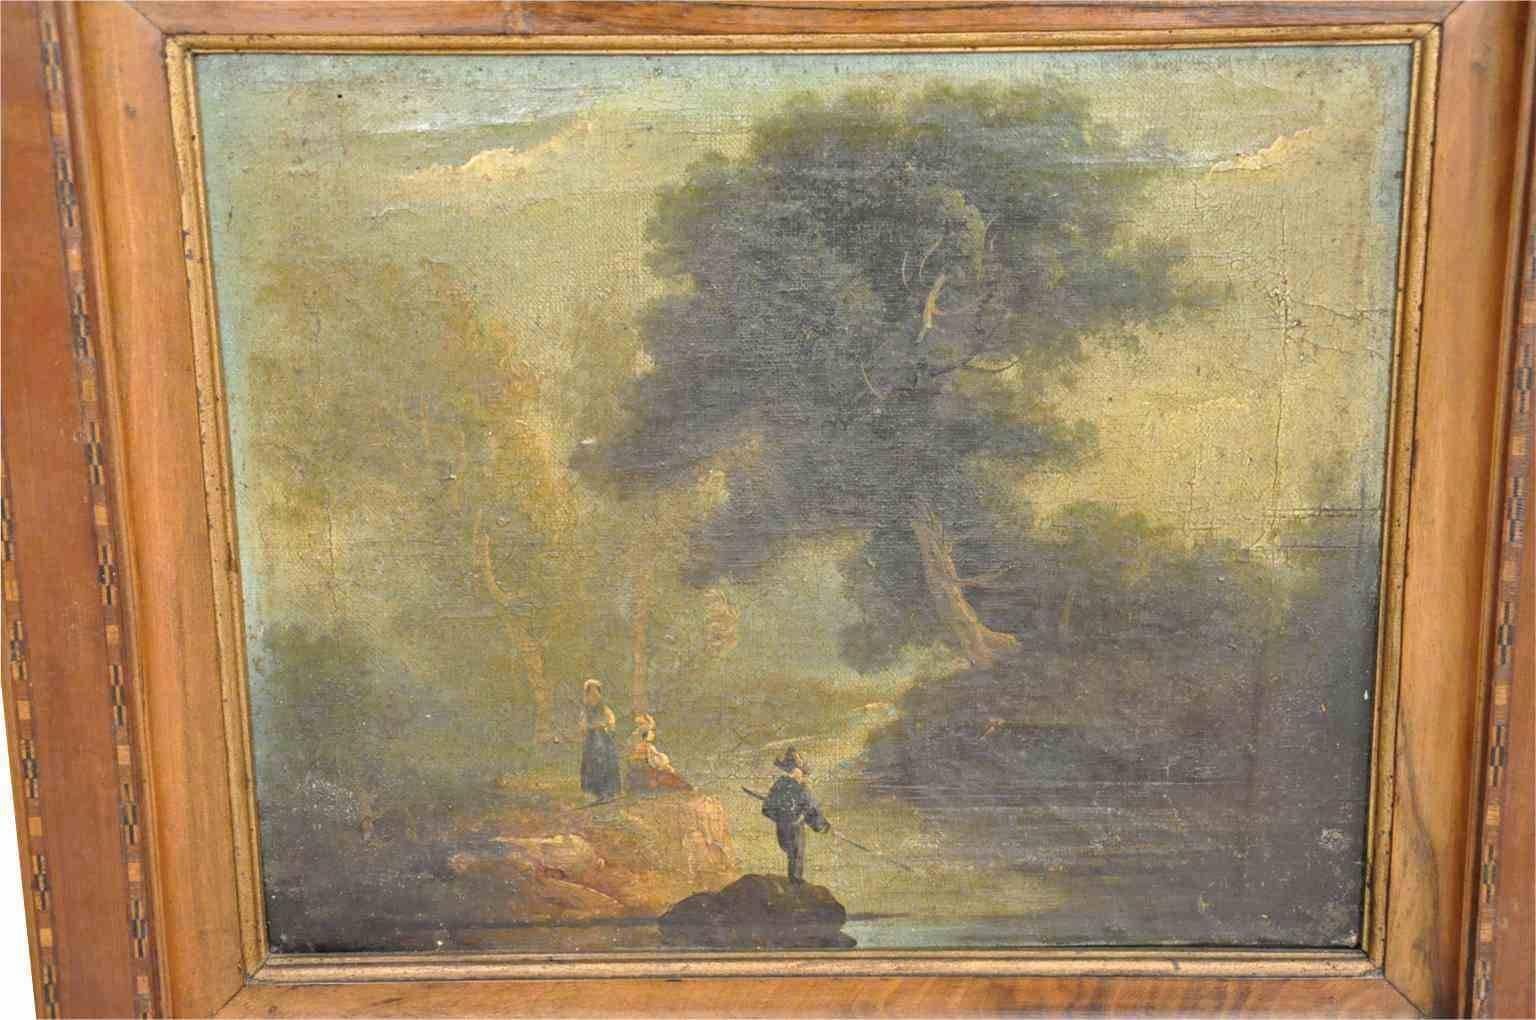 A charming Italian mid-19th century pastoral scene - oil on canvas housed in a very handsome walnut frame. A wonderful accent piece whether hung from a wall, placed on a tabletop easel or in a bookcase.